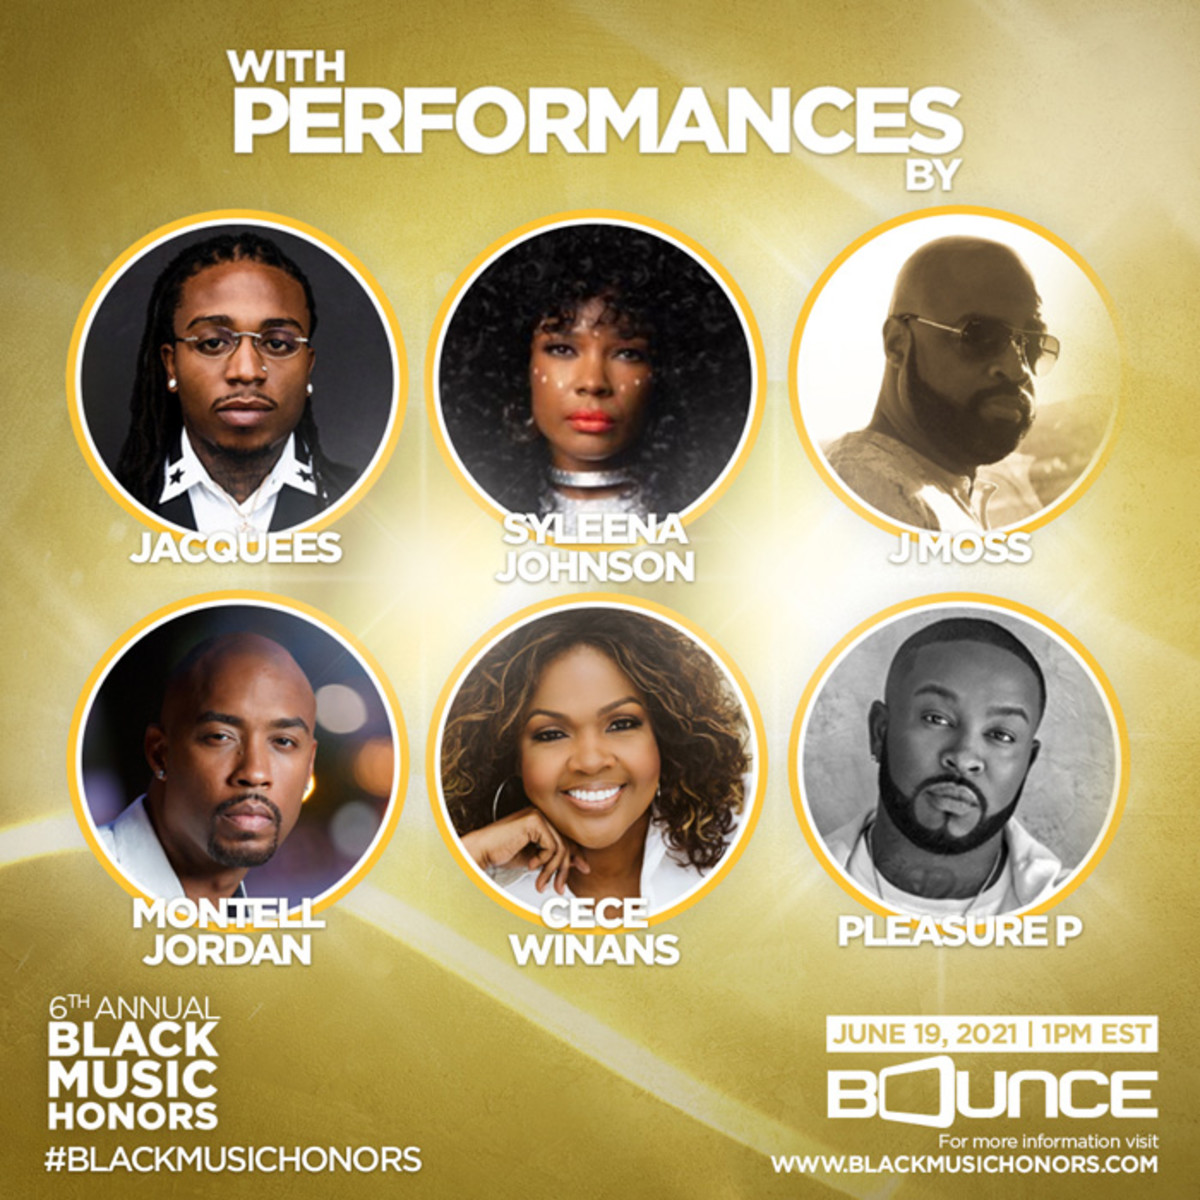 6th Annual Black Music Honors performers